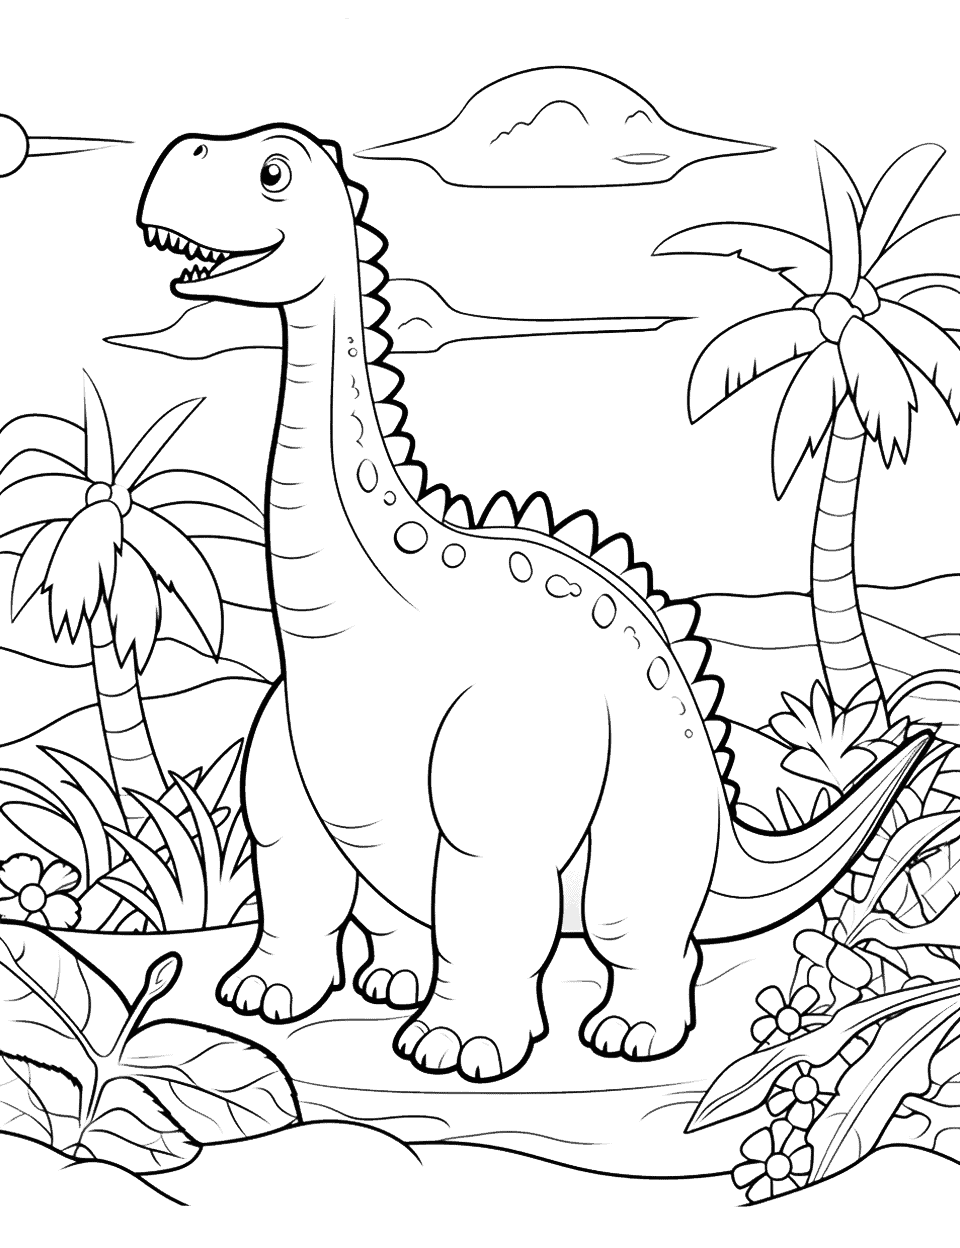 Easy Dinosaur Scene Coloring Page - A simple, easy-to-color scene with a friendly Brachiosaurus munching on leaves.